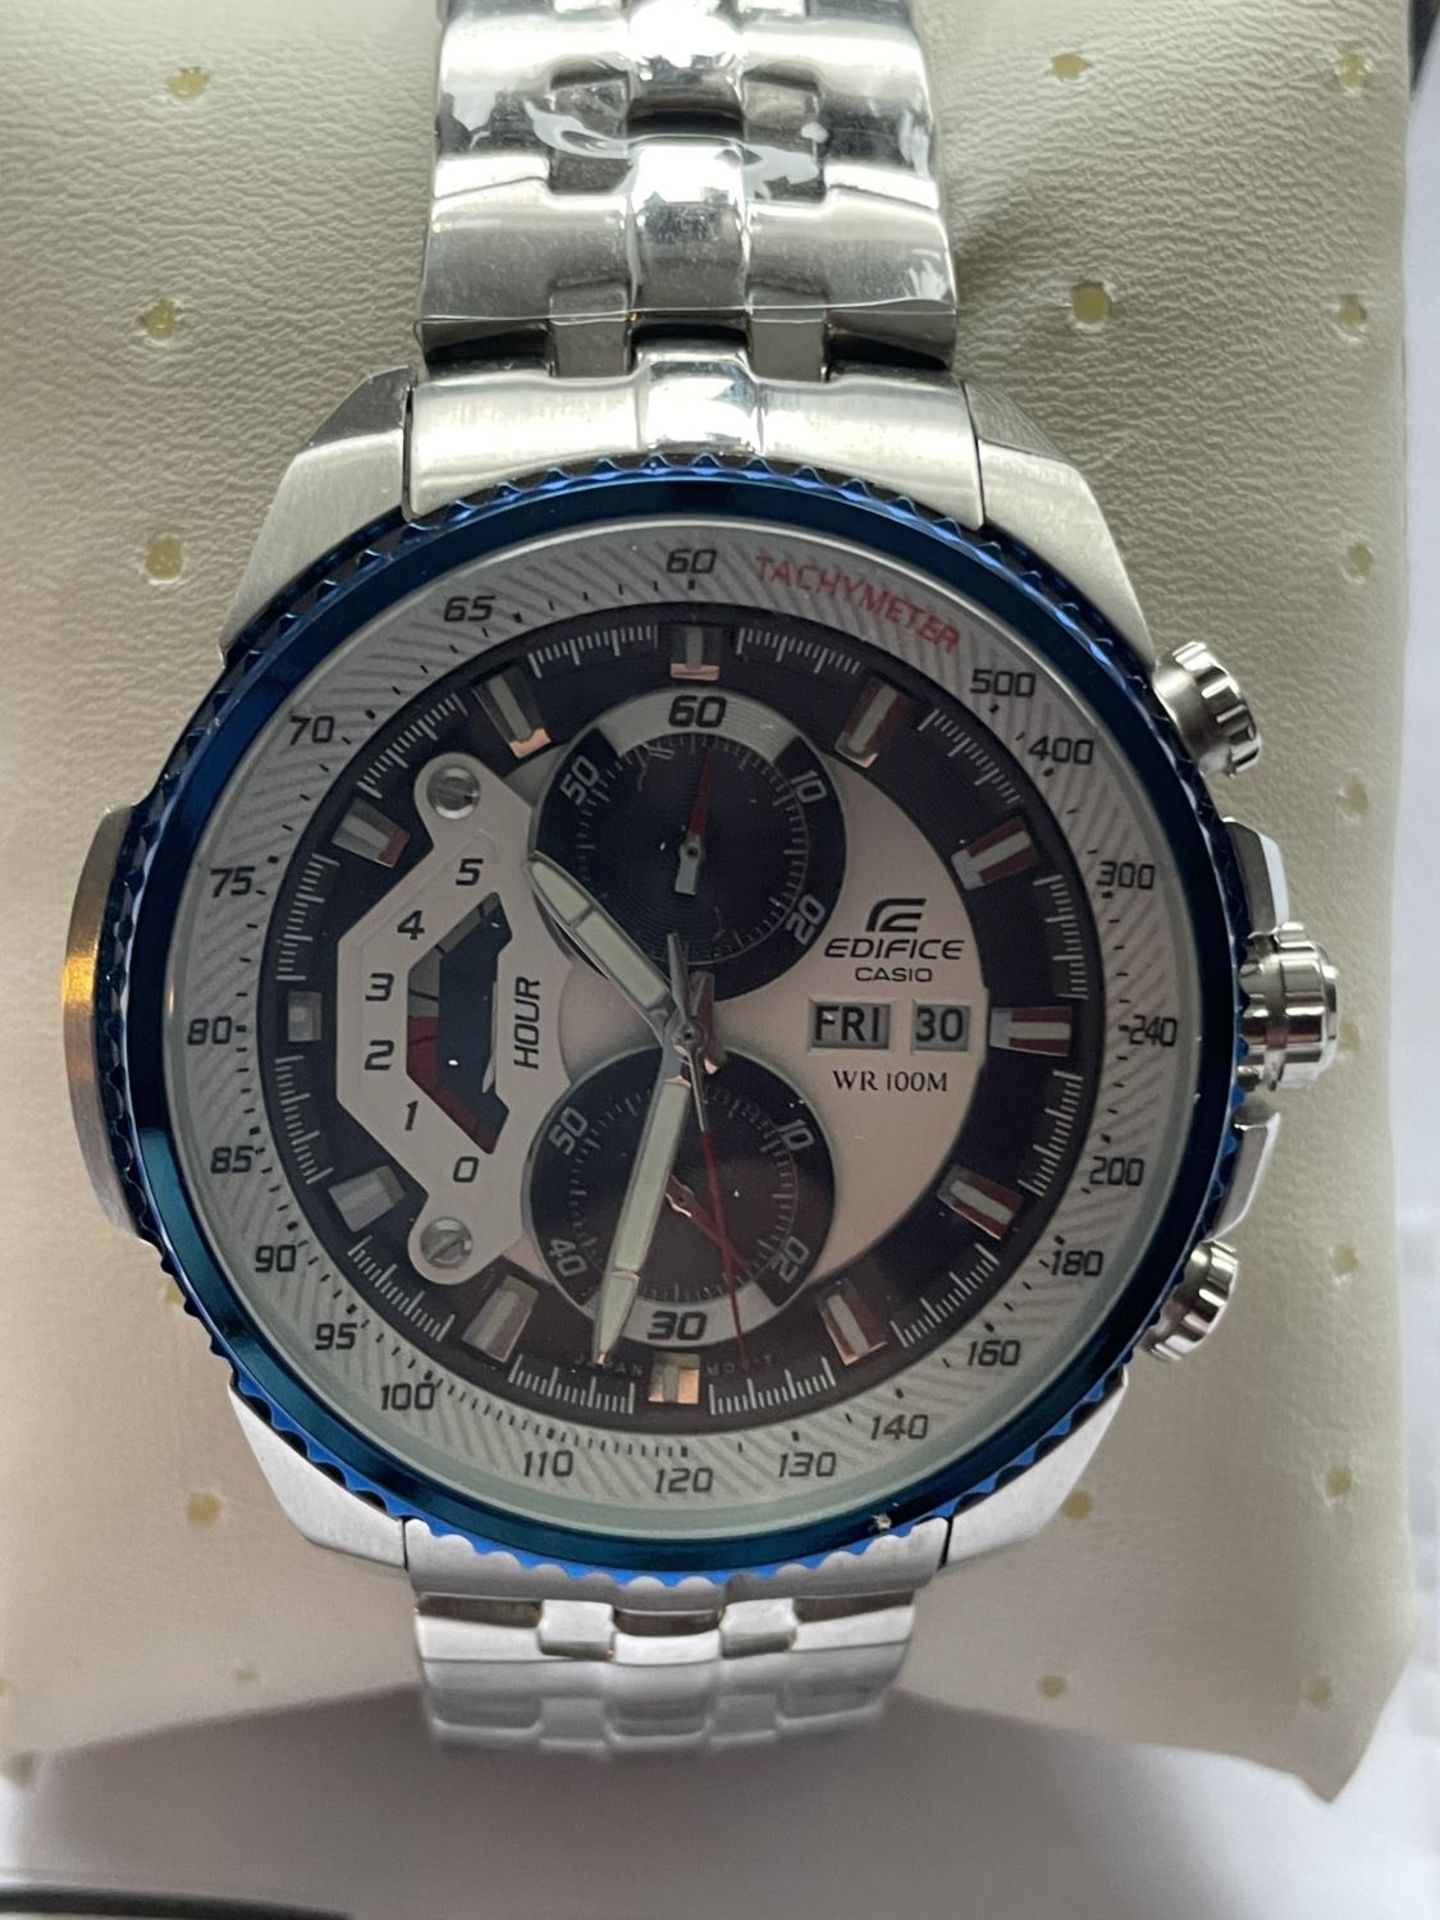 AN AS NEW AND BOXED CASIO EDIFICE WRIST WATCH SEEN WORKING BUT NO WARRANTY - Image 2 of 3